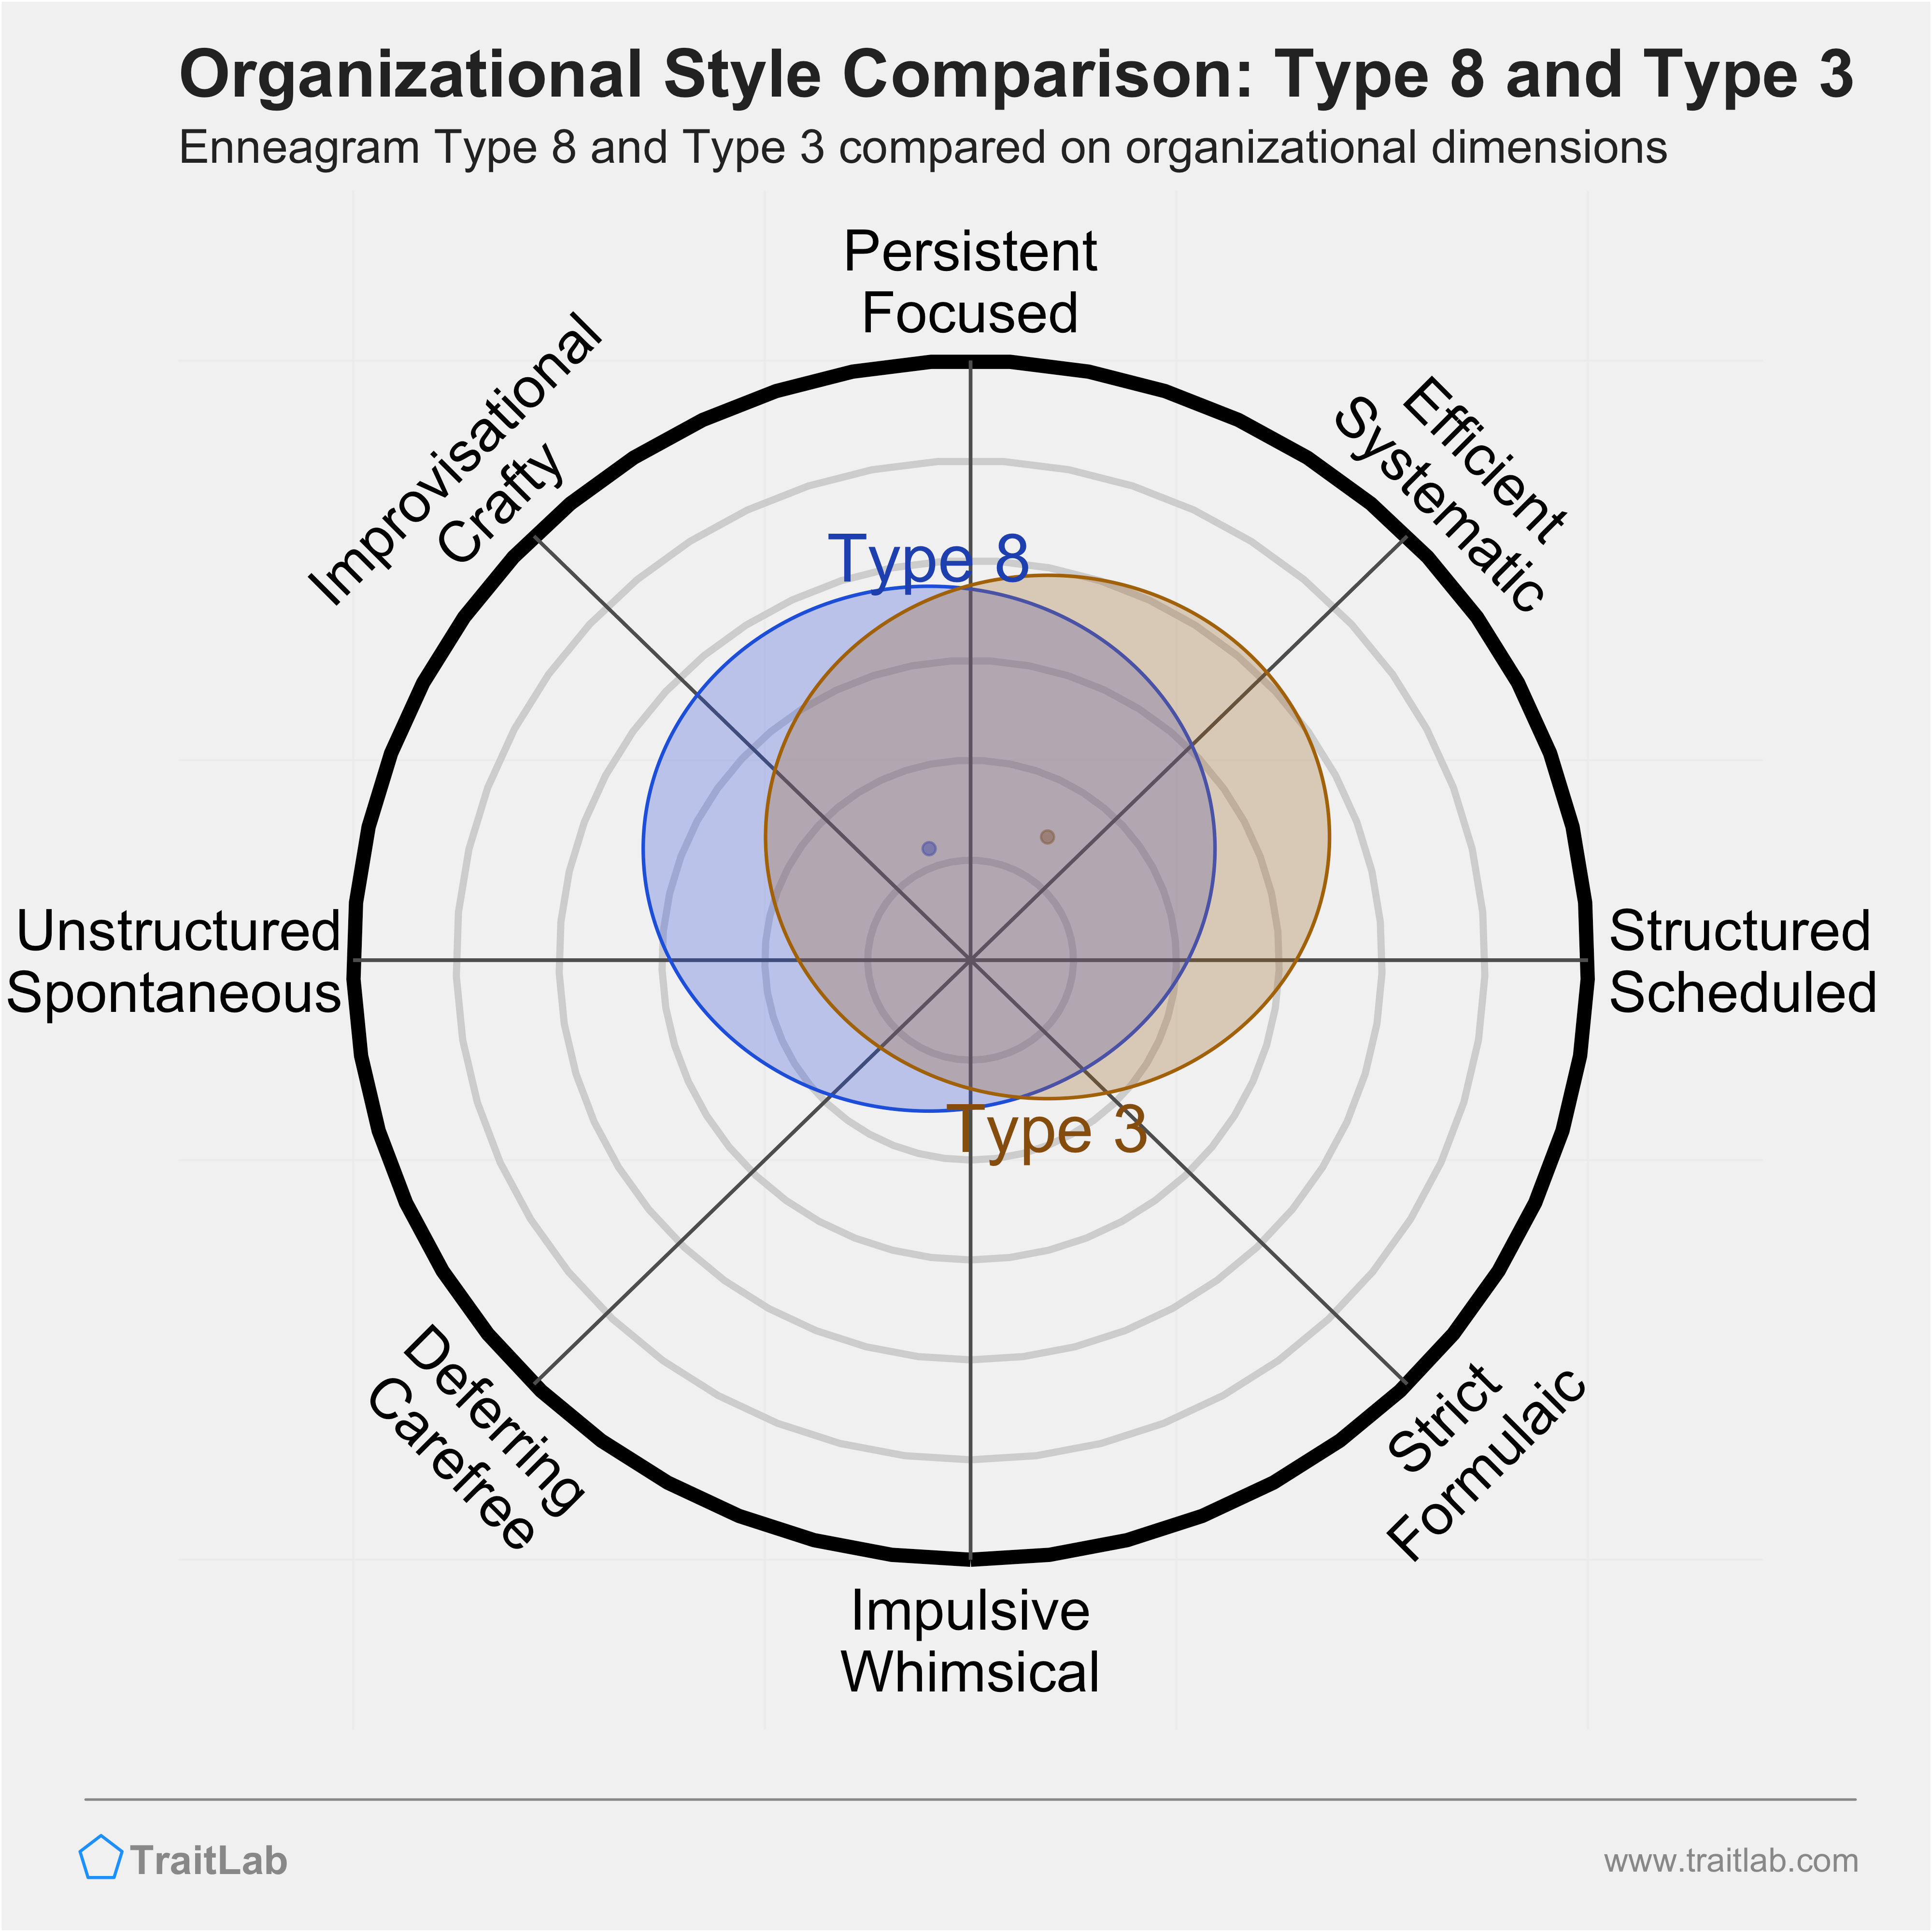 Type 8 and Type 3 comparison across organizational dimensions